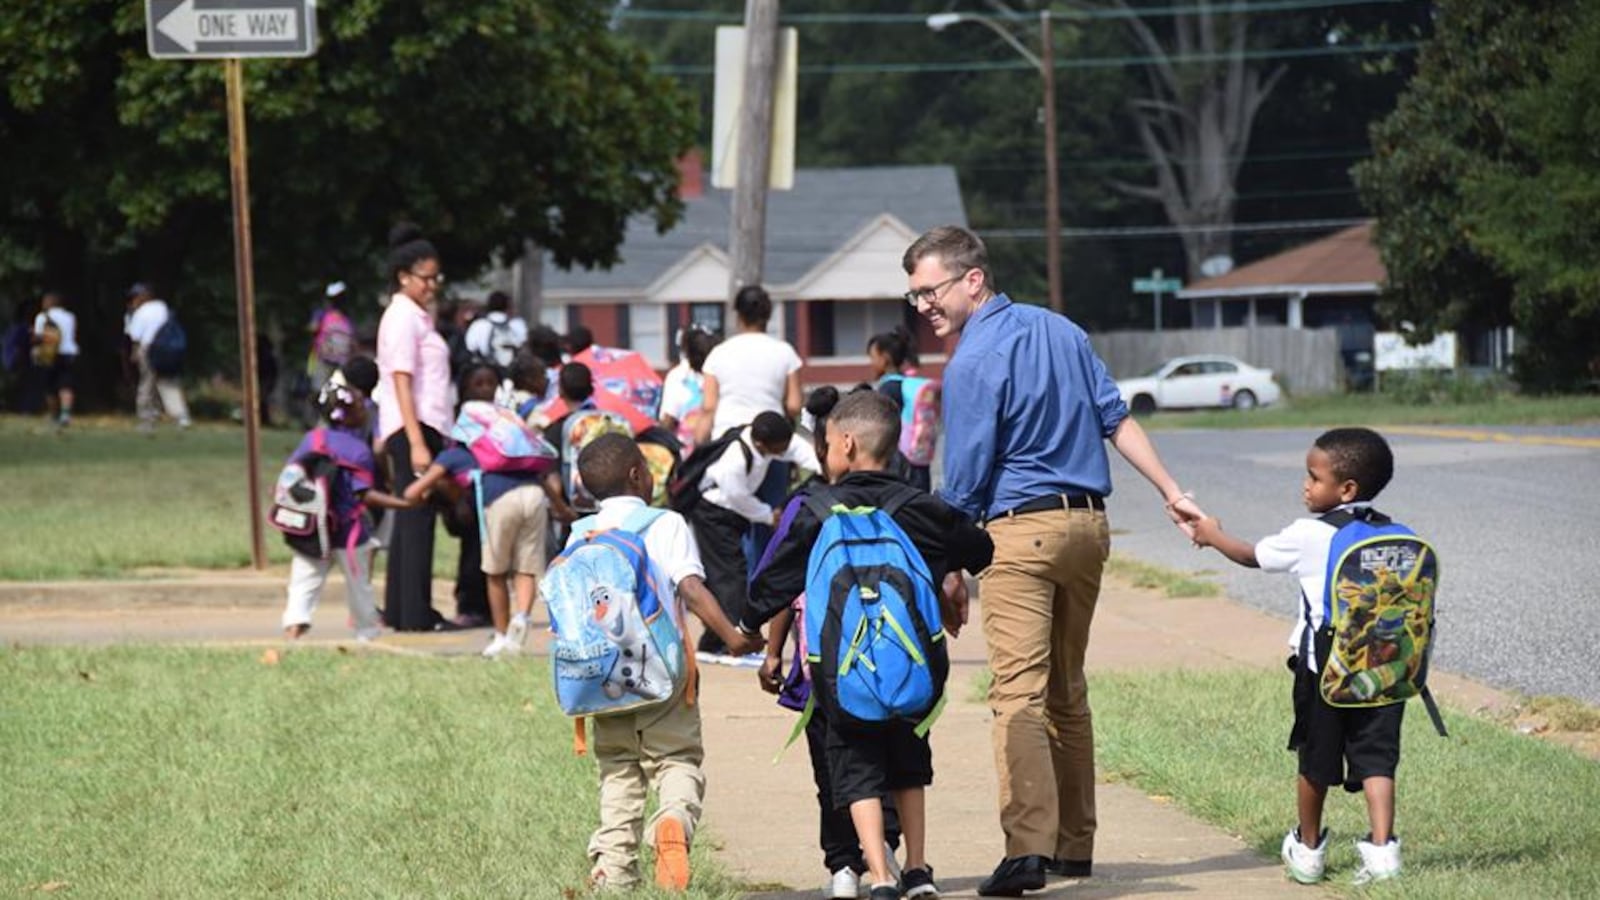 Teacher Carl Schneider walks children home in 2015 as part of the after-school walking program at Whitney Achievement Elementary School in Memphis. This photograph went viral and inspired a First Person reflection from Schneider in 2017.